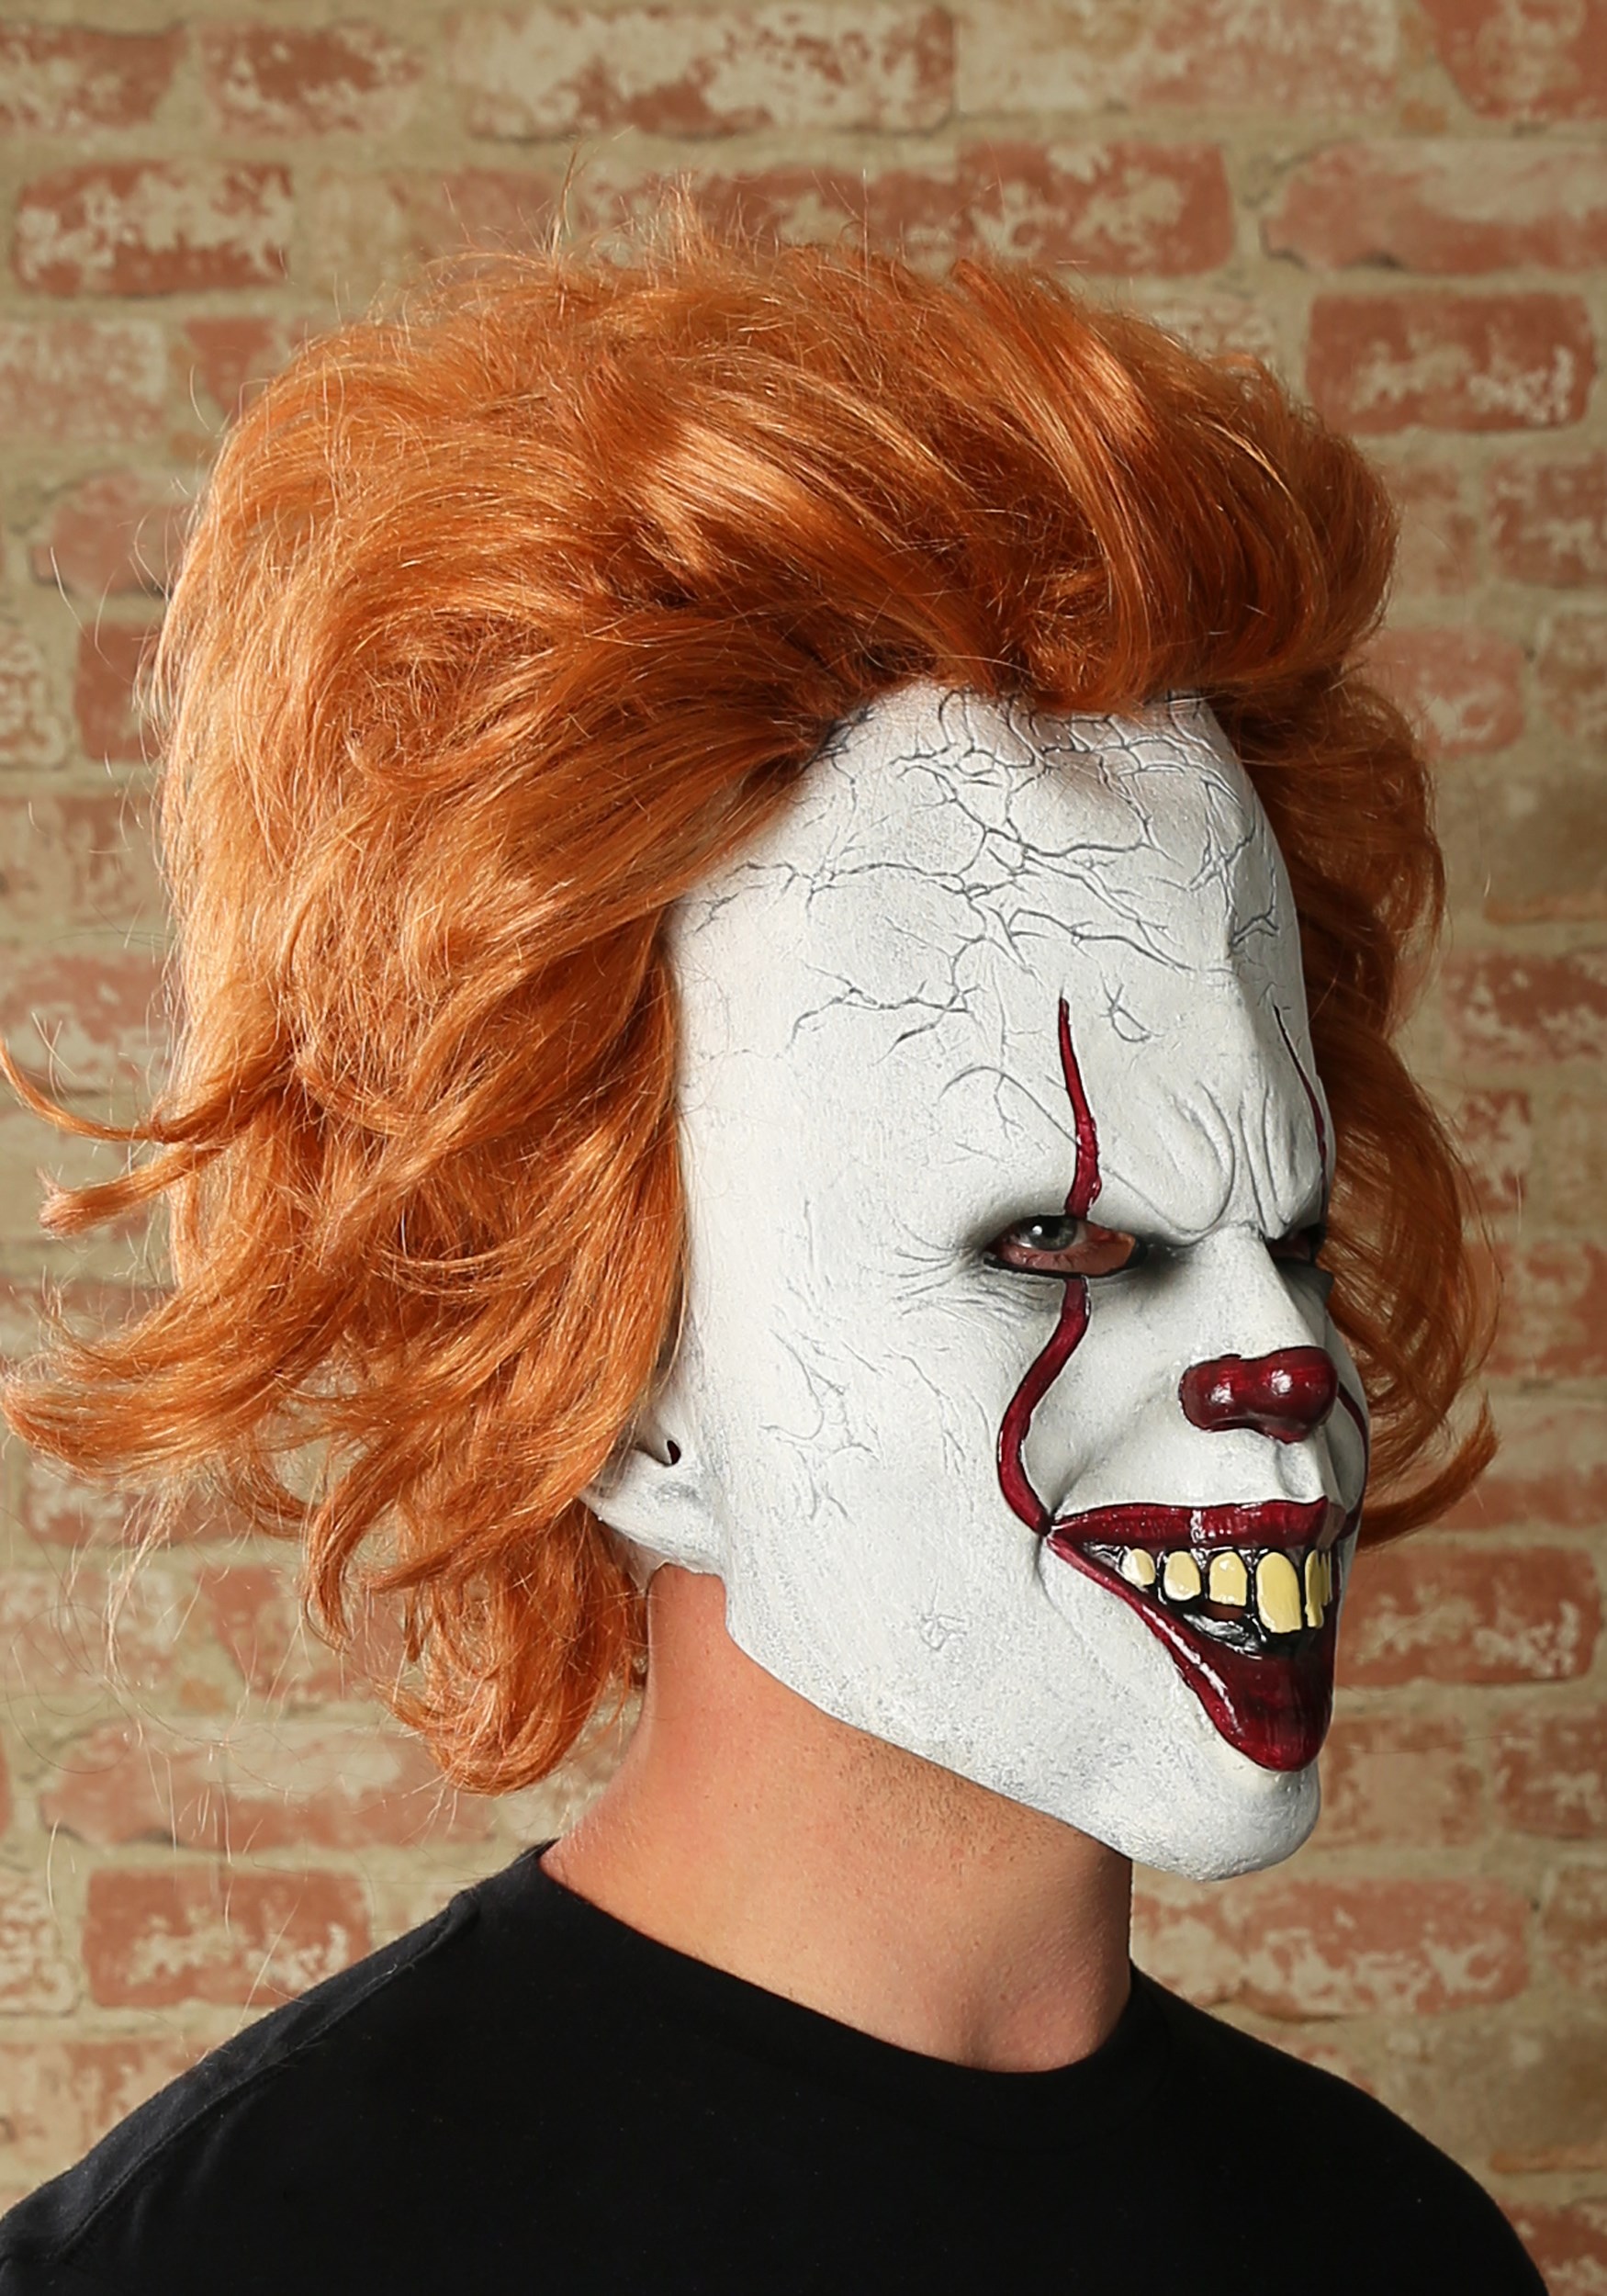 Trick or Treat It Pennywise Clown Deluxe Mask Adult Halloween Costume Mbwb100 for sale online 